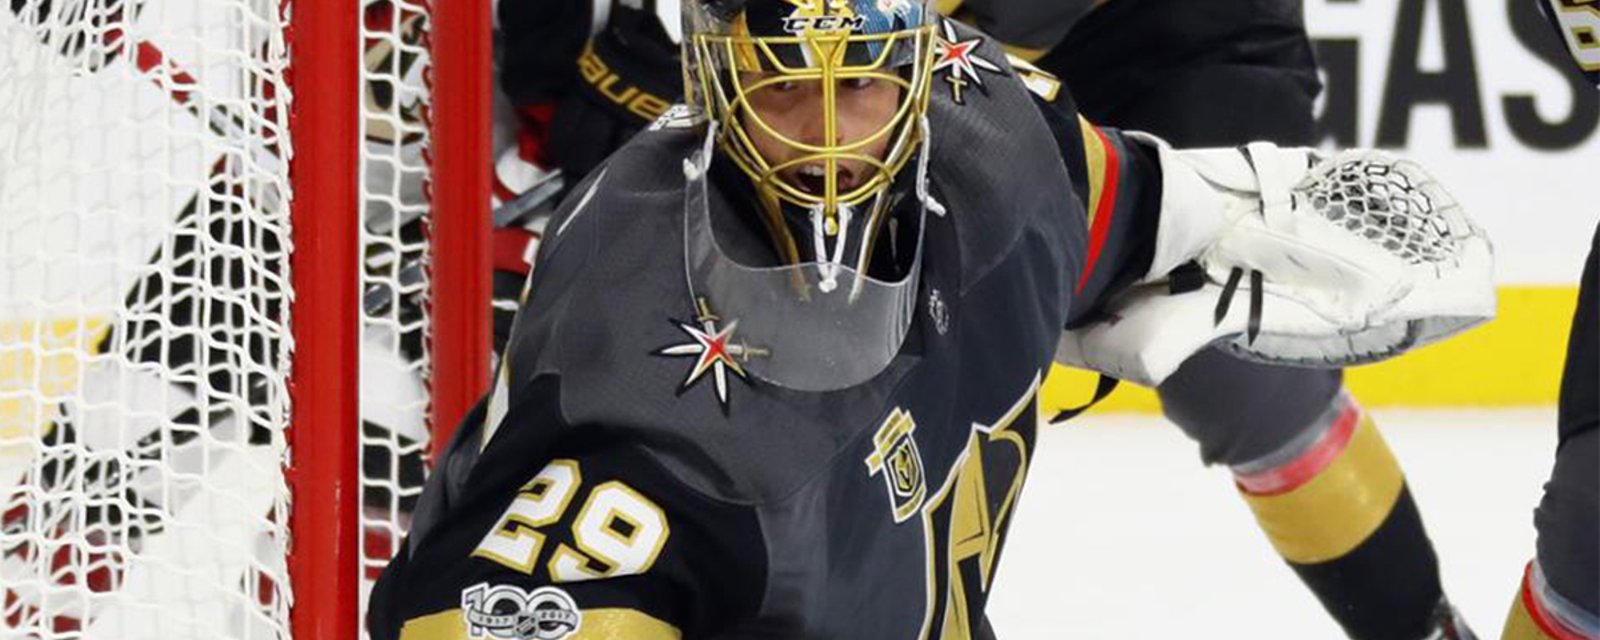 Injury Report: Excellent news for Vegas’ Fleury